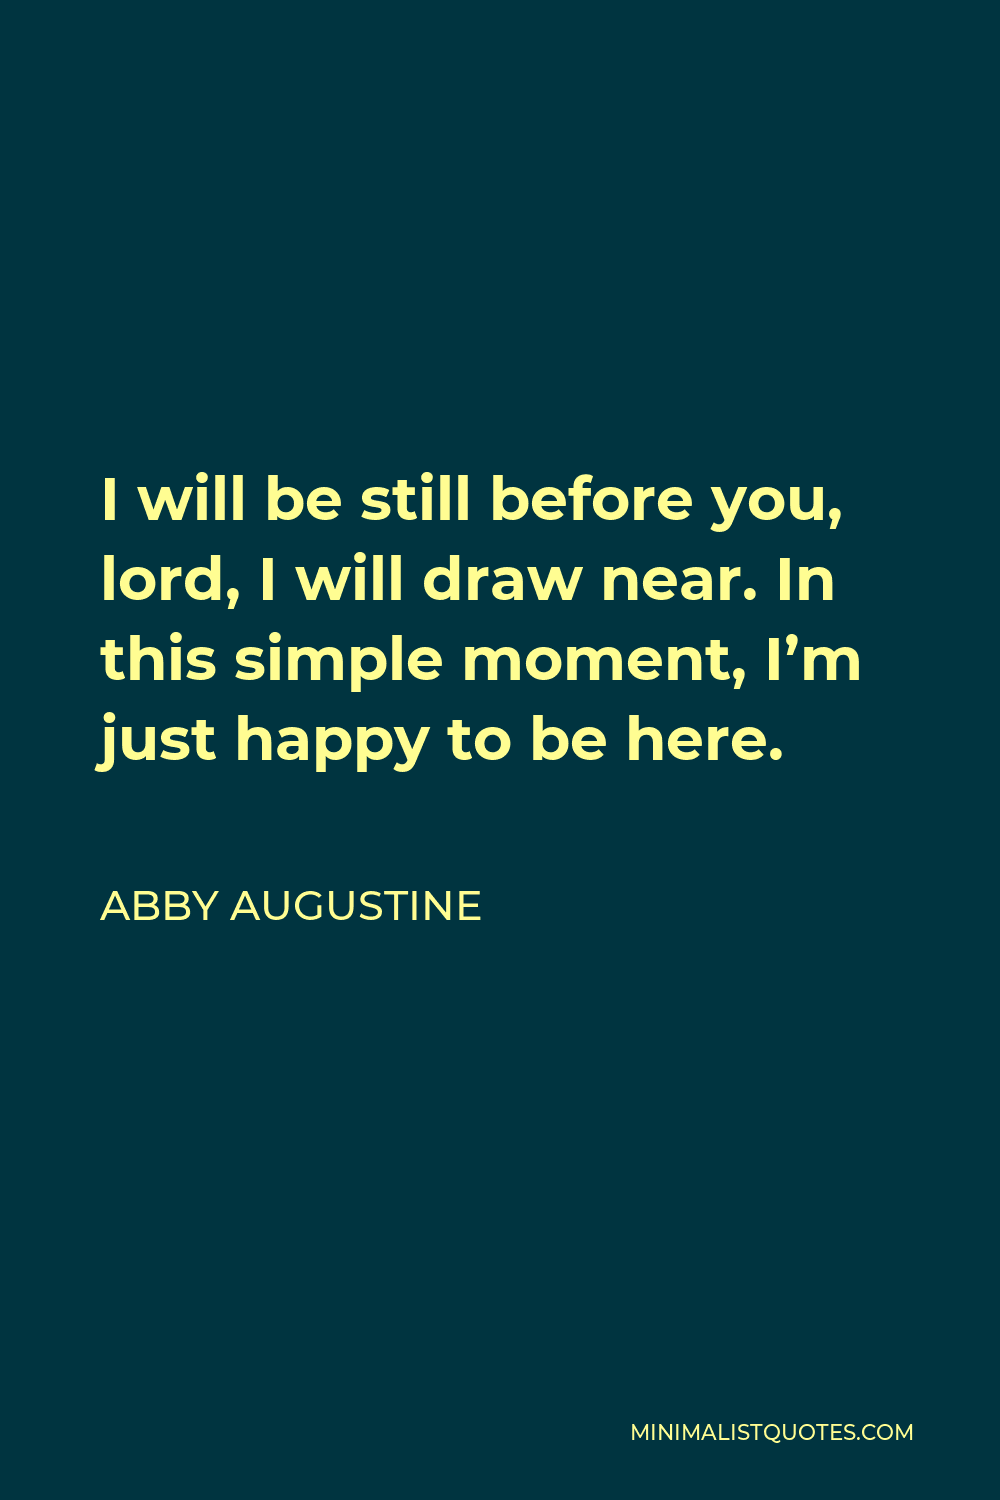 Abby Augustine Quote - I will be still before you, lord, I will draw near. In this simple moment, I’m just happy to be here.